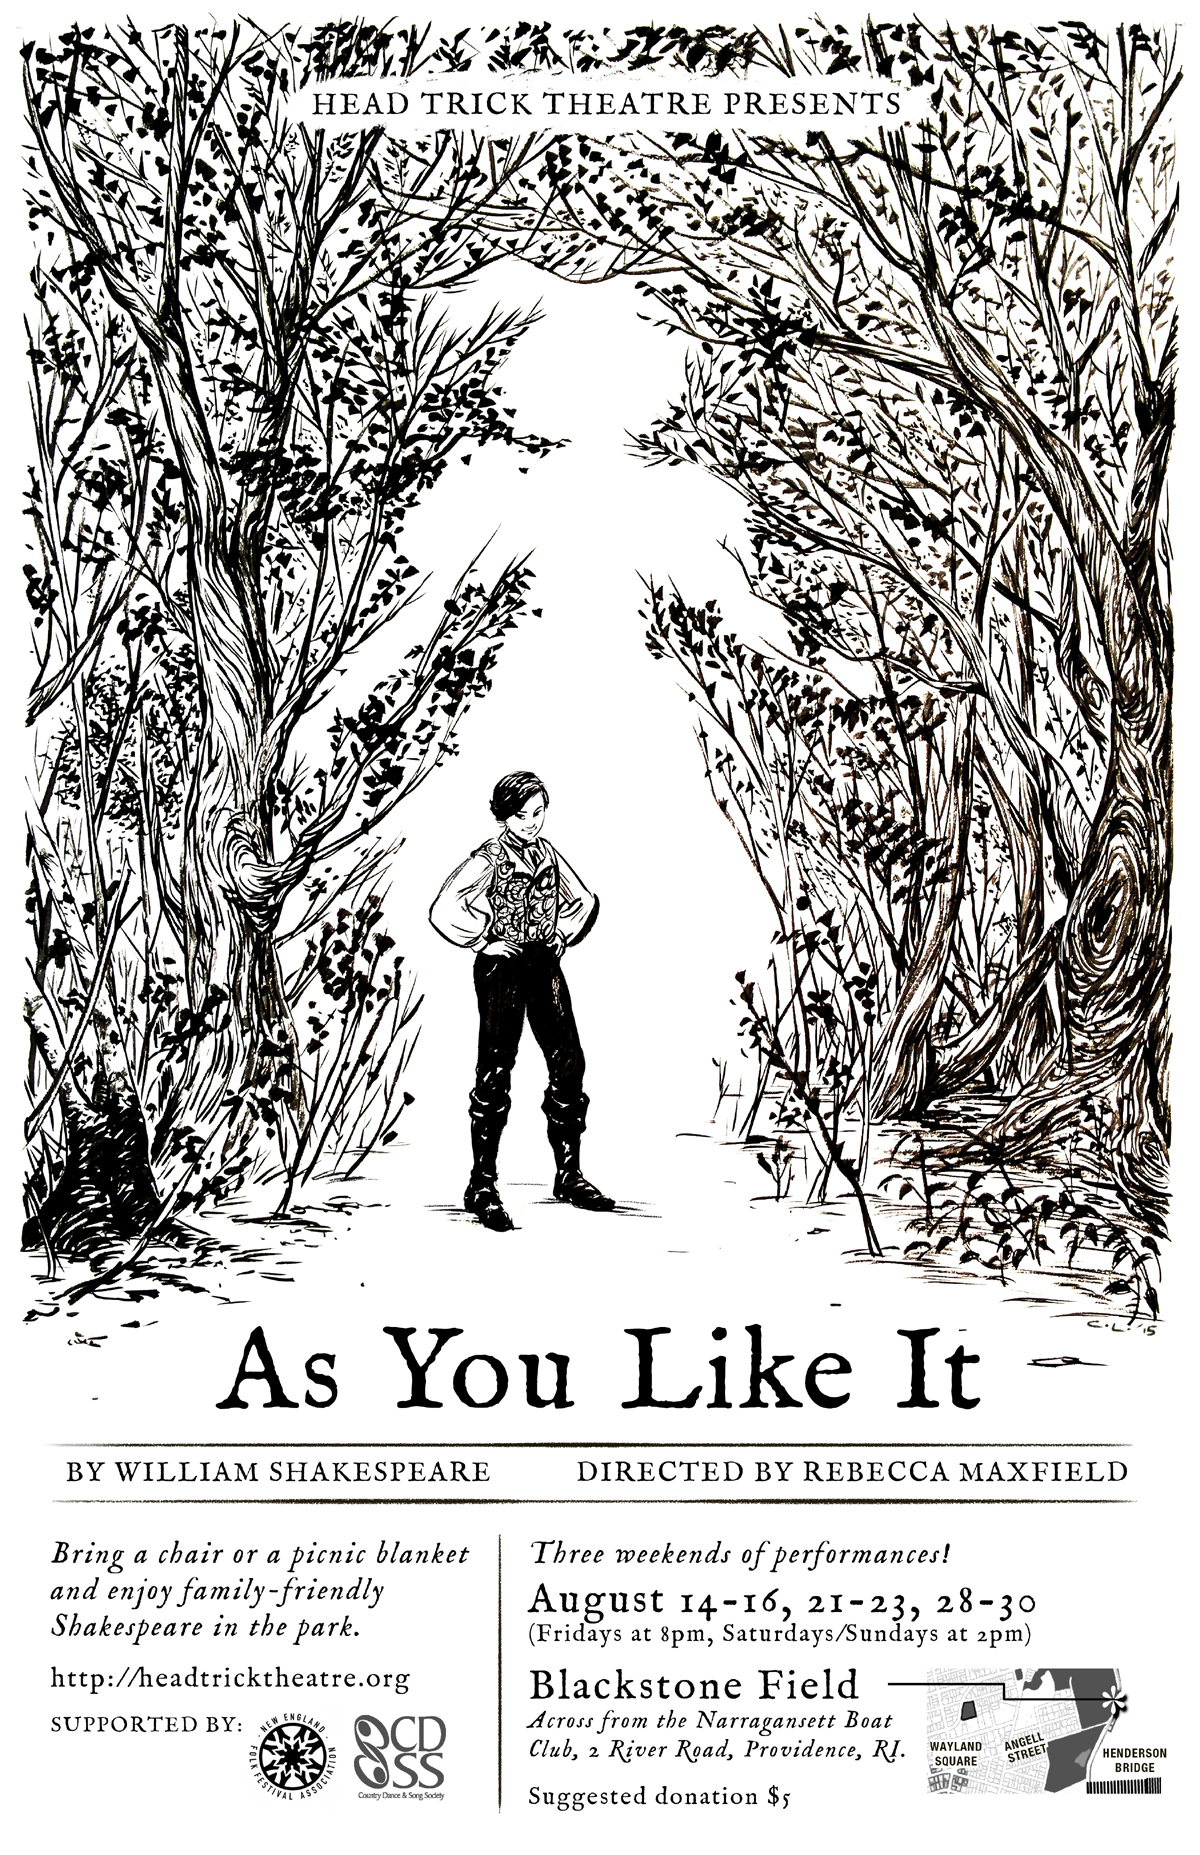 Head Trick Theatre presents Shakespeare's 'As You Like It' directed by Rebecca Maxfield